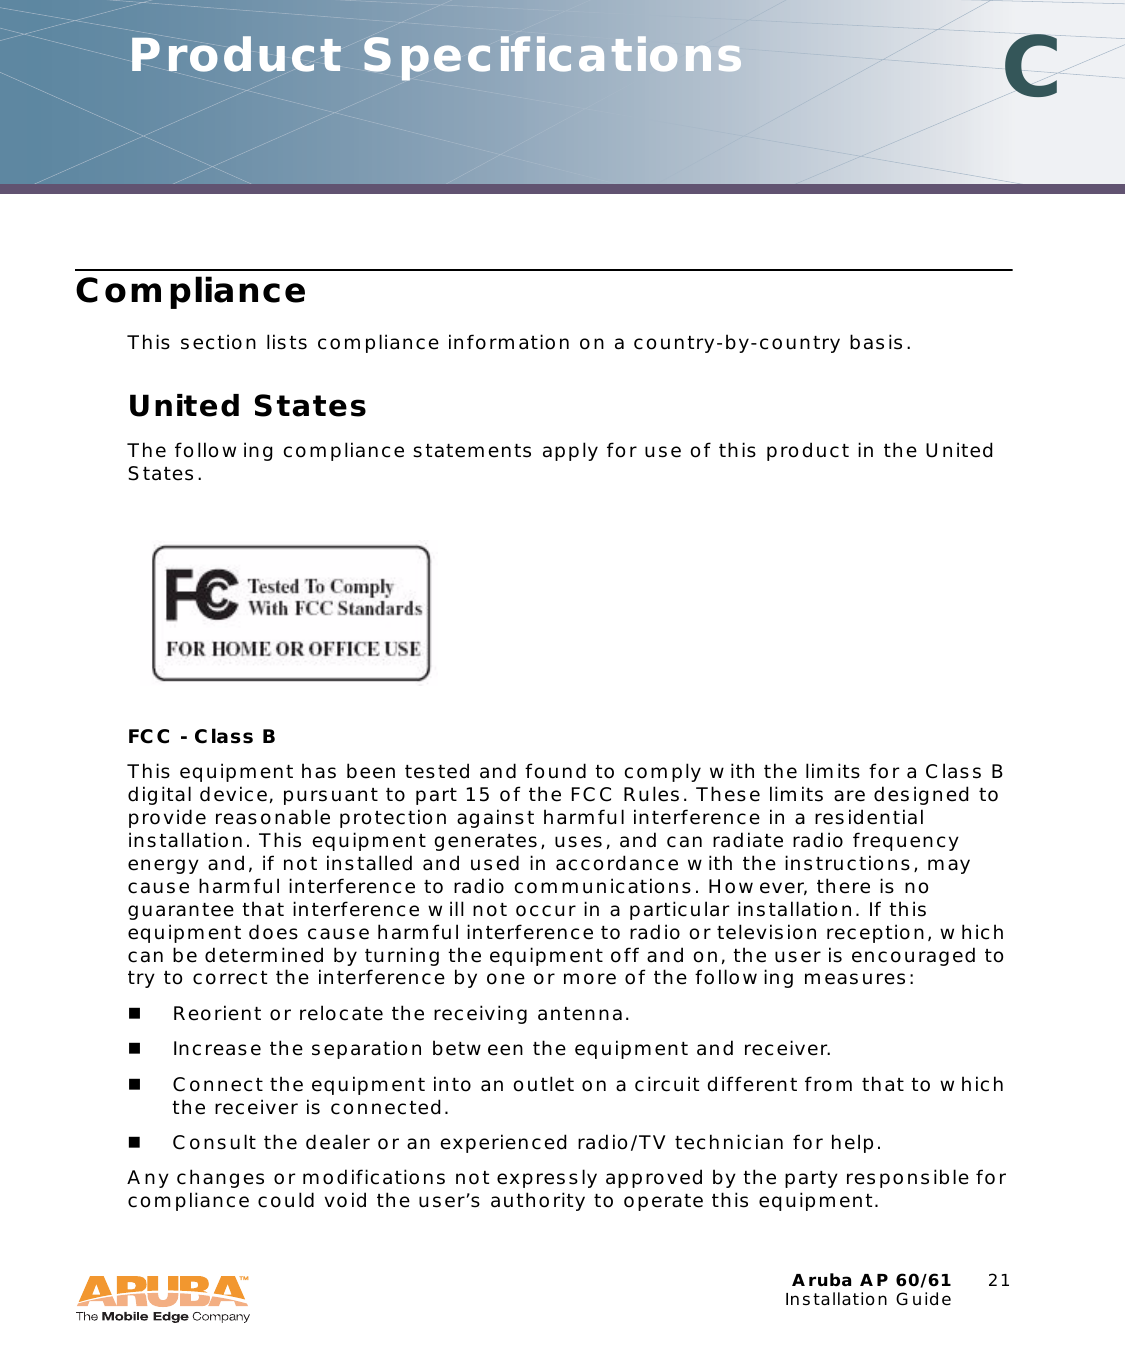 Aruba AP 60/61 21Installation GuideComplianceThis section lists compliance information on a country-by-country basis.United StatesThe following compliance statements apply for use of this product in the United States.FCC - Class B This equipment has been tested and found to comply with the limits for a Class B digital device, pursuant to part 15 of the FCC Rules. These limits are designed to provide reasonable protection against harmful interference in a residential installation. This equipment generates, uses, and can radiate radio frequency energy and, if not installed and used in accordance with the instructions, may cause harmful interference to radio communications. However, there is no guarantee that interference will not occur in a particular installation. If this equipment does cause harmful interference to radio or television reception, which can be determined by turning the equipment off and on, the user is encouraged to try to correct the interference by one or more of the following measures:Reorient or relocate the receiving antenna.Increase the separation between the equipment and receiver.Connect the equipment into an outlet on a circuit different from that to which the receiver is connected.Consult the dealer or an experienced radio/TV technician for help.Any changes or modifications not expressly approved by the party responsible for compliance could void the user’s authority to operate this equipment.Product Specifications C